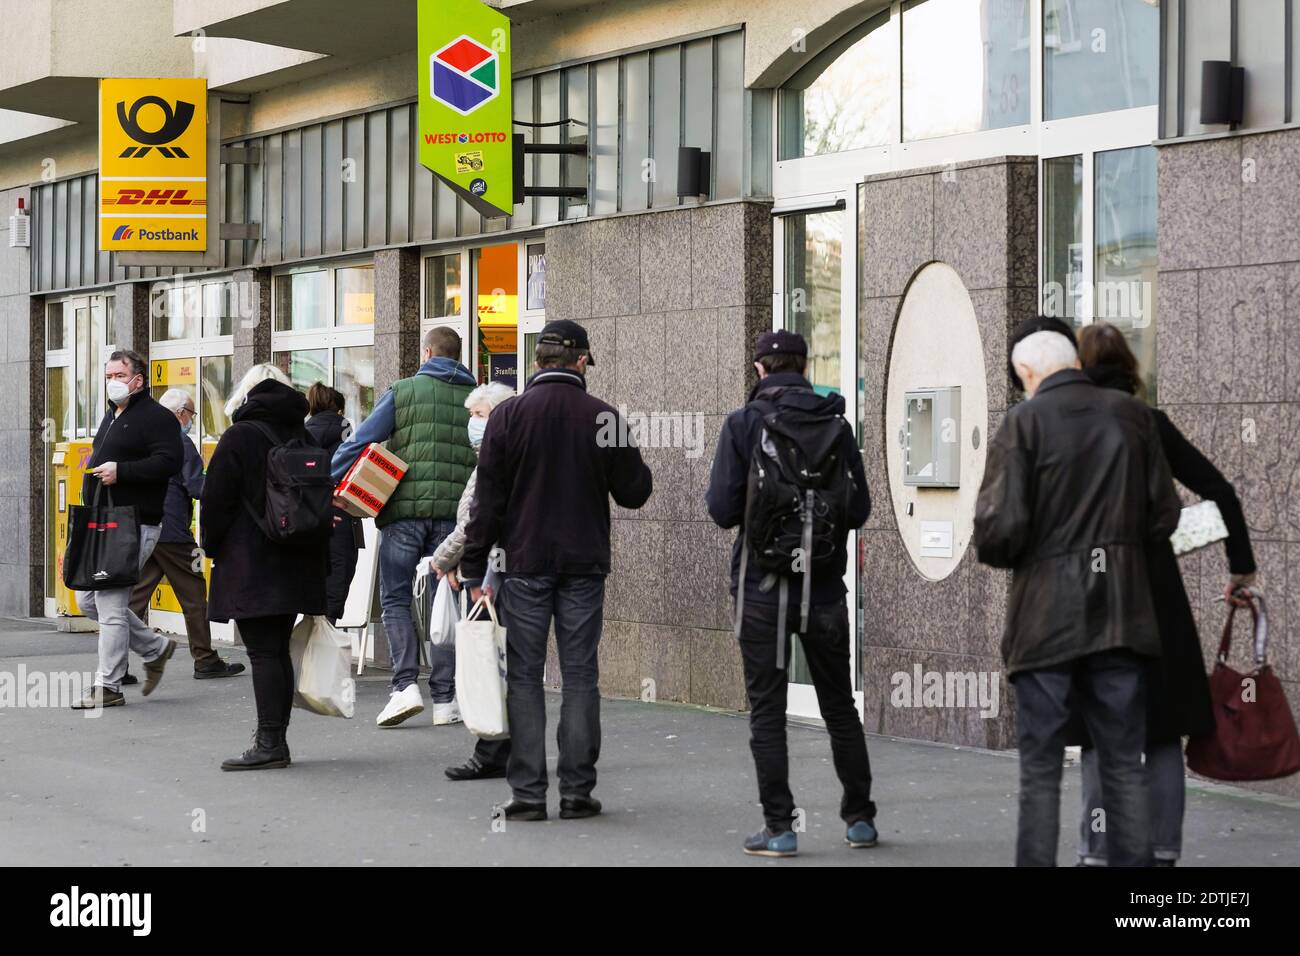 Dortmund, Germany, December 18th, 2020: Customers wait on the sidewalk in front of a branch of Deutsche Post / DHL in Dortmund. Due to the restrictions of the second lockdown of the corona pandemic, only 3 customers are allowed to stay in this branch at the same time. Stock Photo